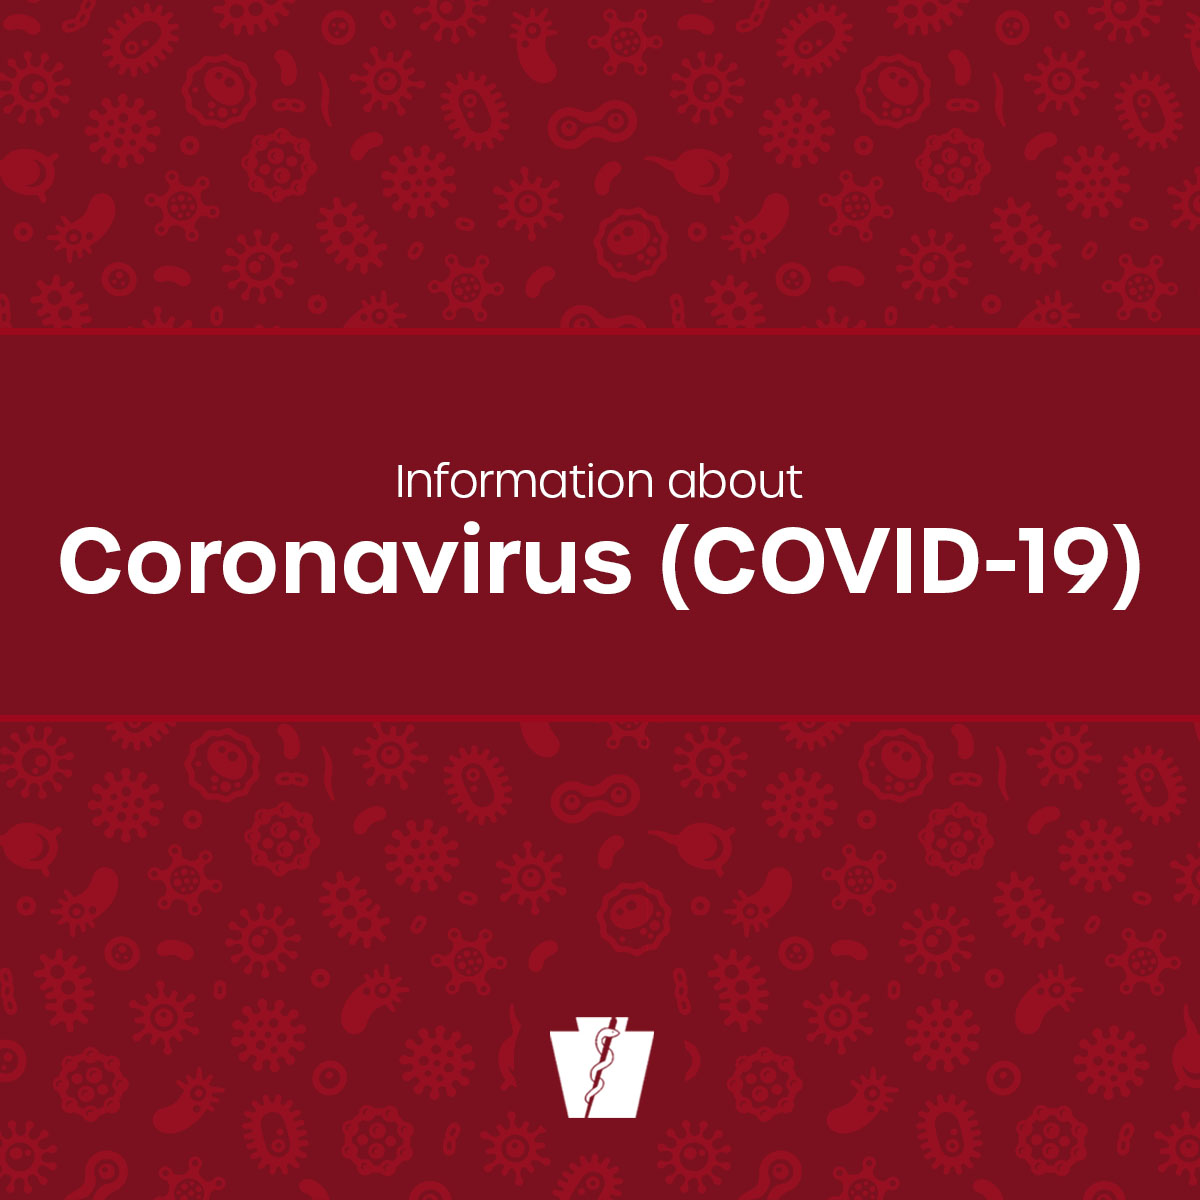 Information about COVID-19 for Facebook